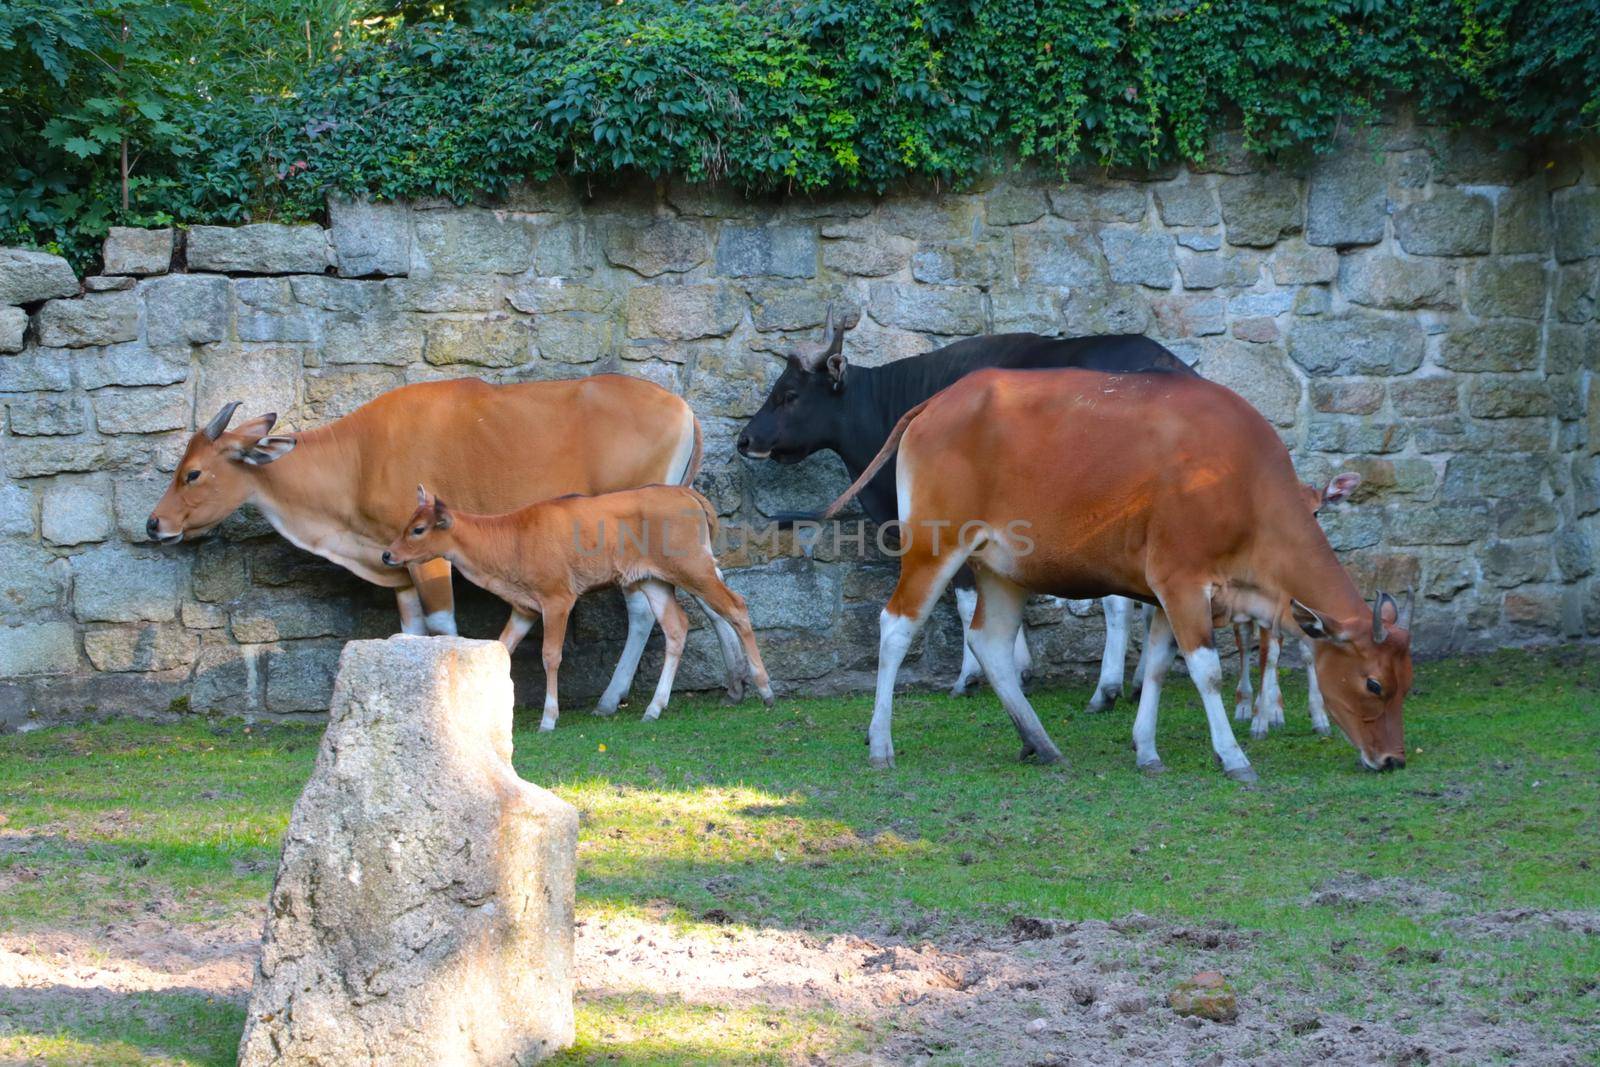 The banteng is the ancestor of the Asian cow. The species is now under threat of extinction